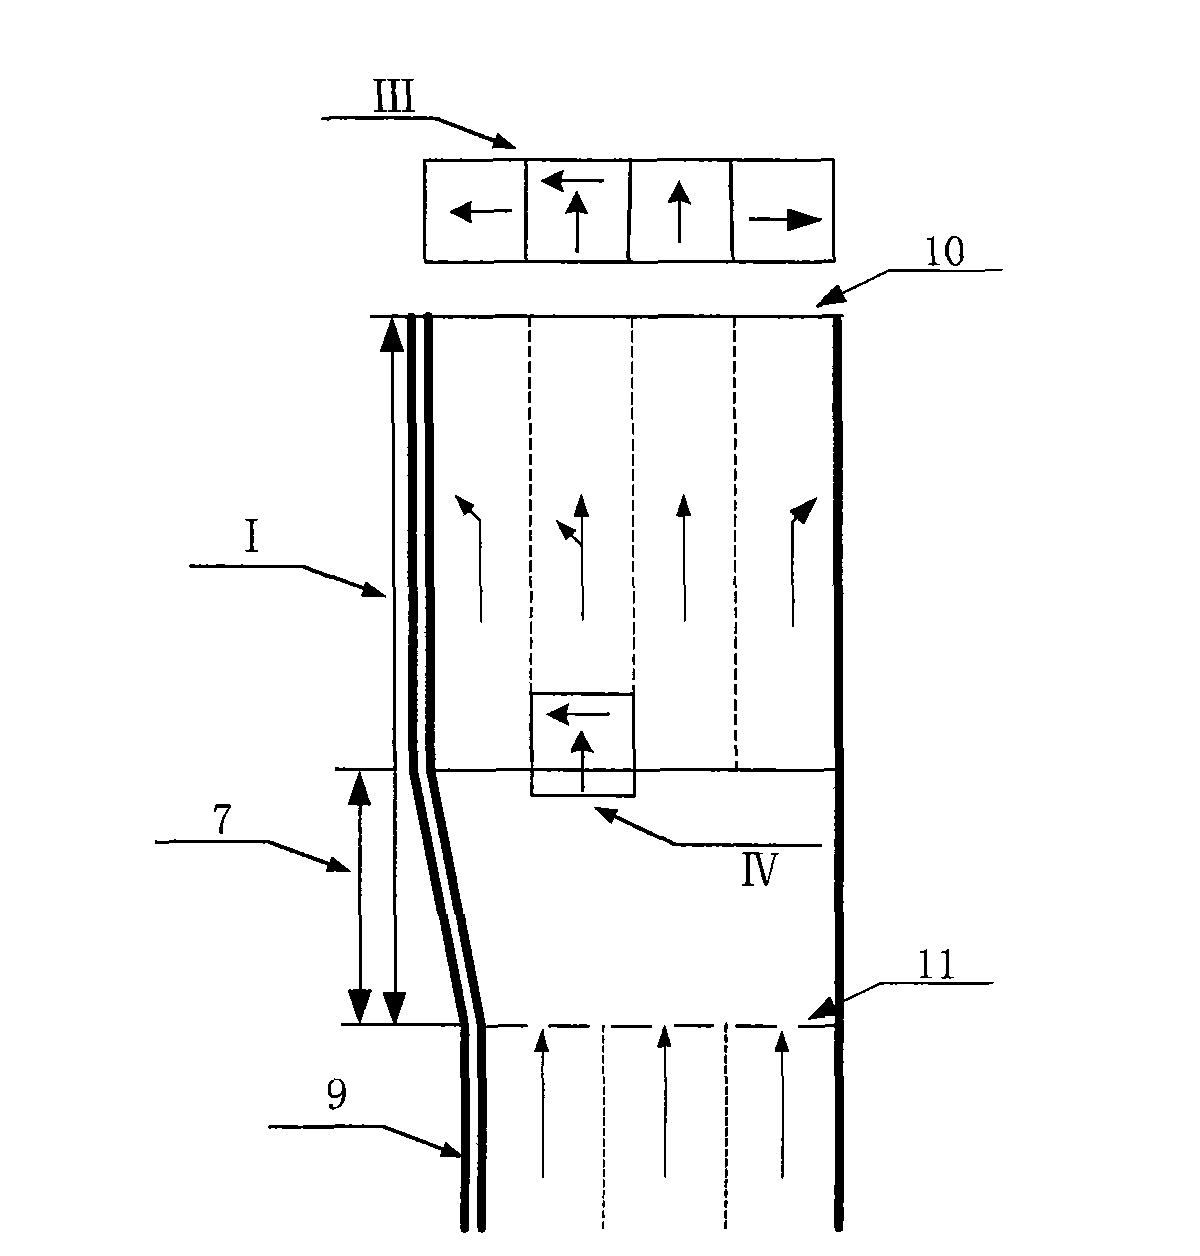 Method for setting crossing self-adapting changeable driveway